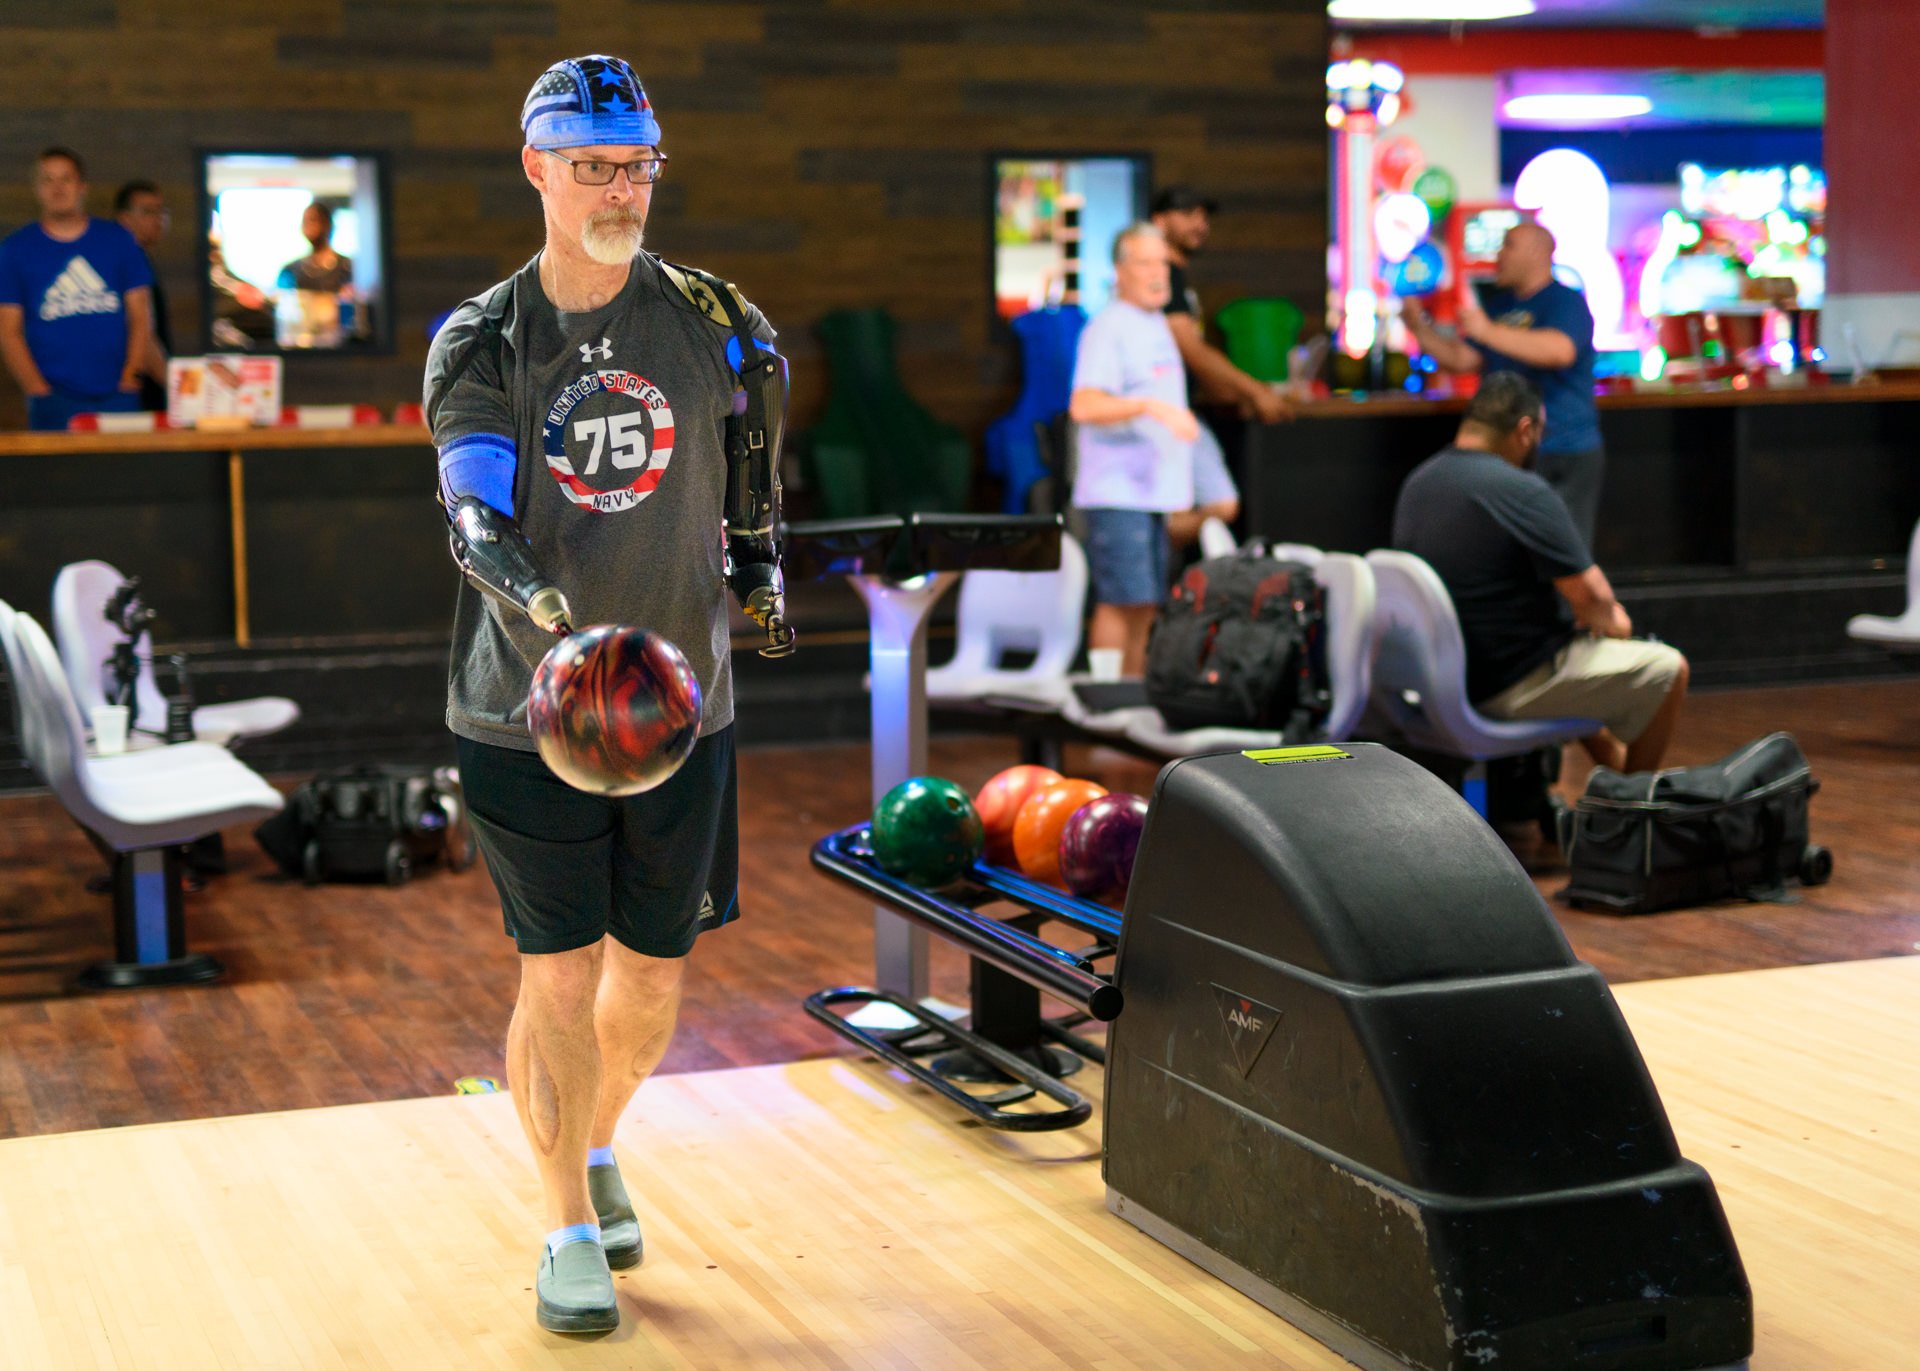 A bilateral transradial patient uses his bowling activity-specific prosthesis.